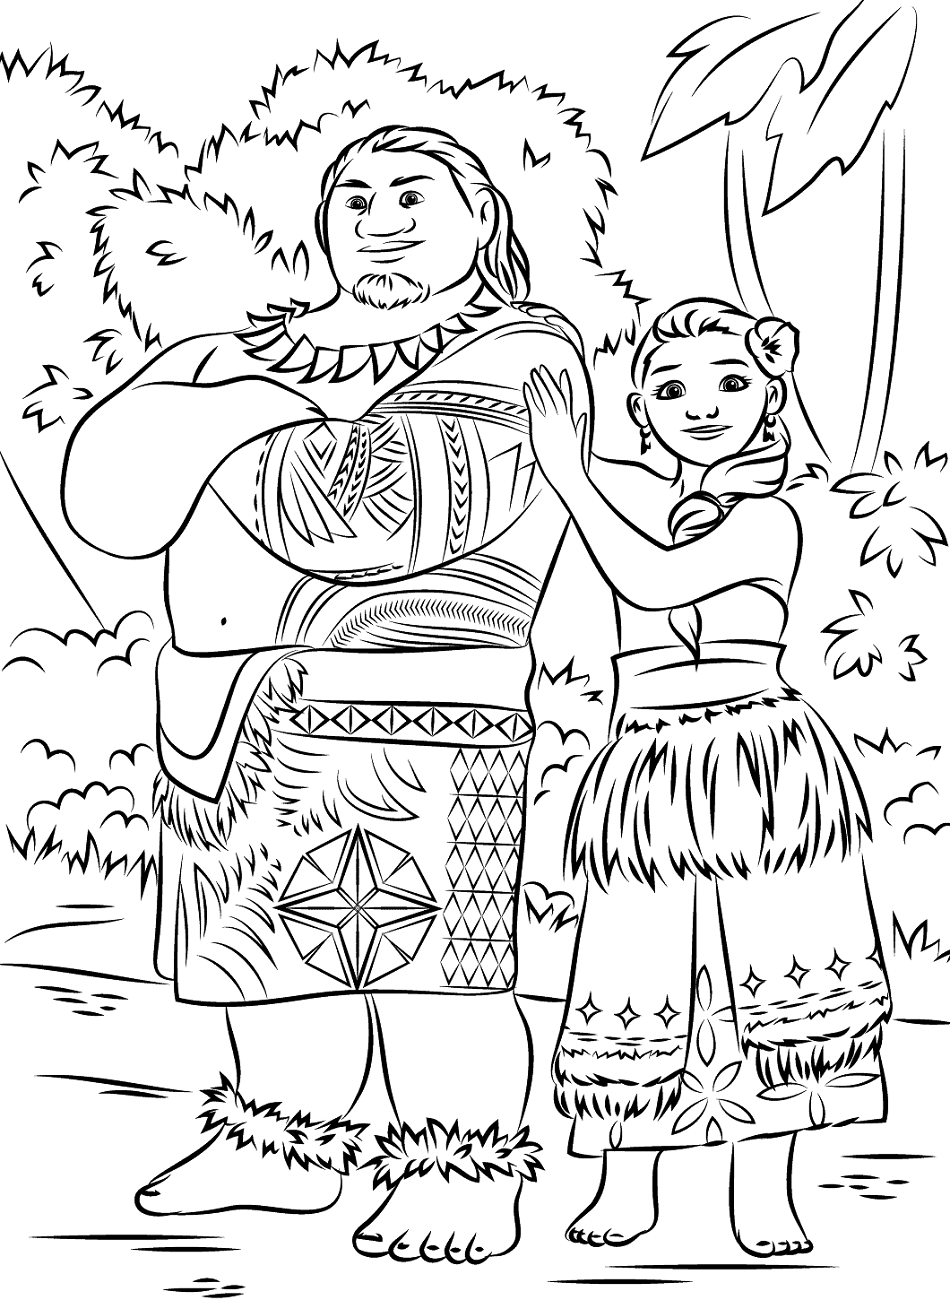 Chief Tui And Sina In Moana Coloring Page Free Printable Coloring Pages For Kids